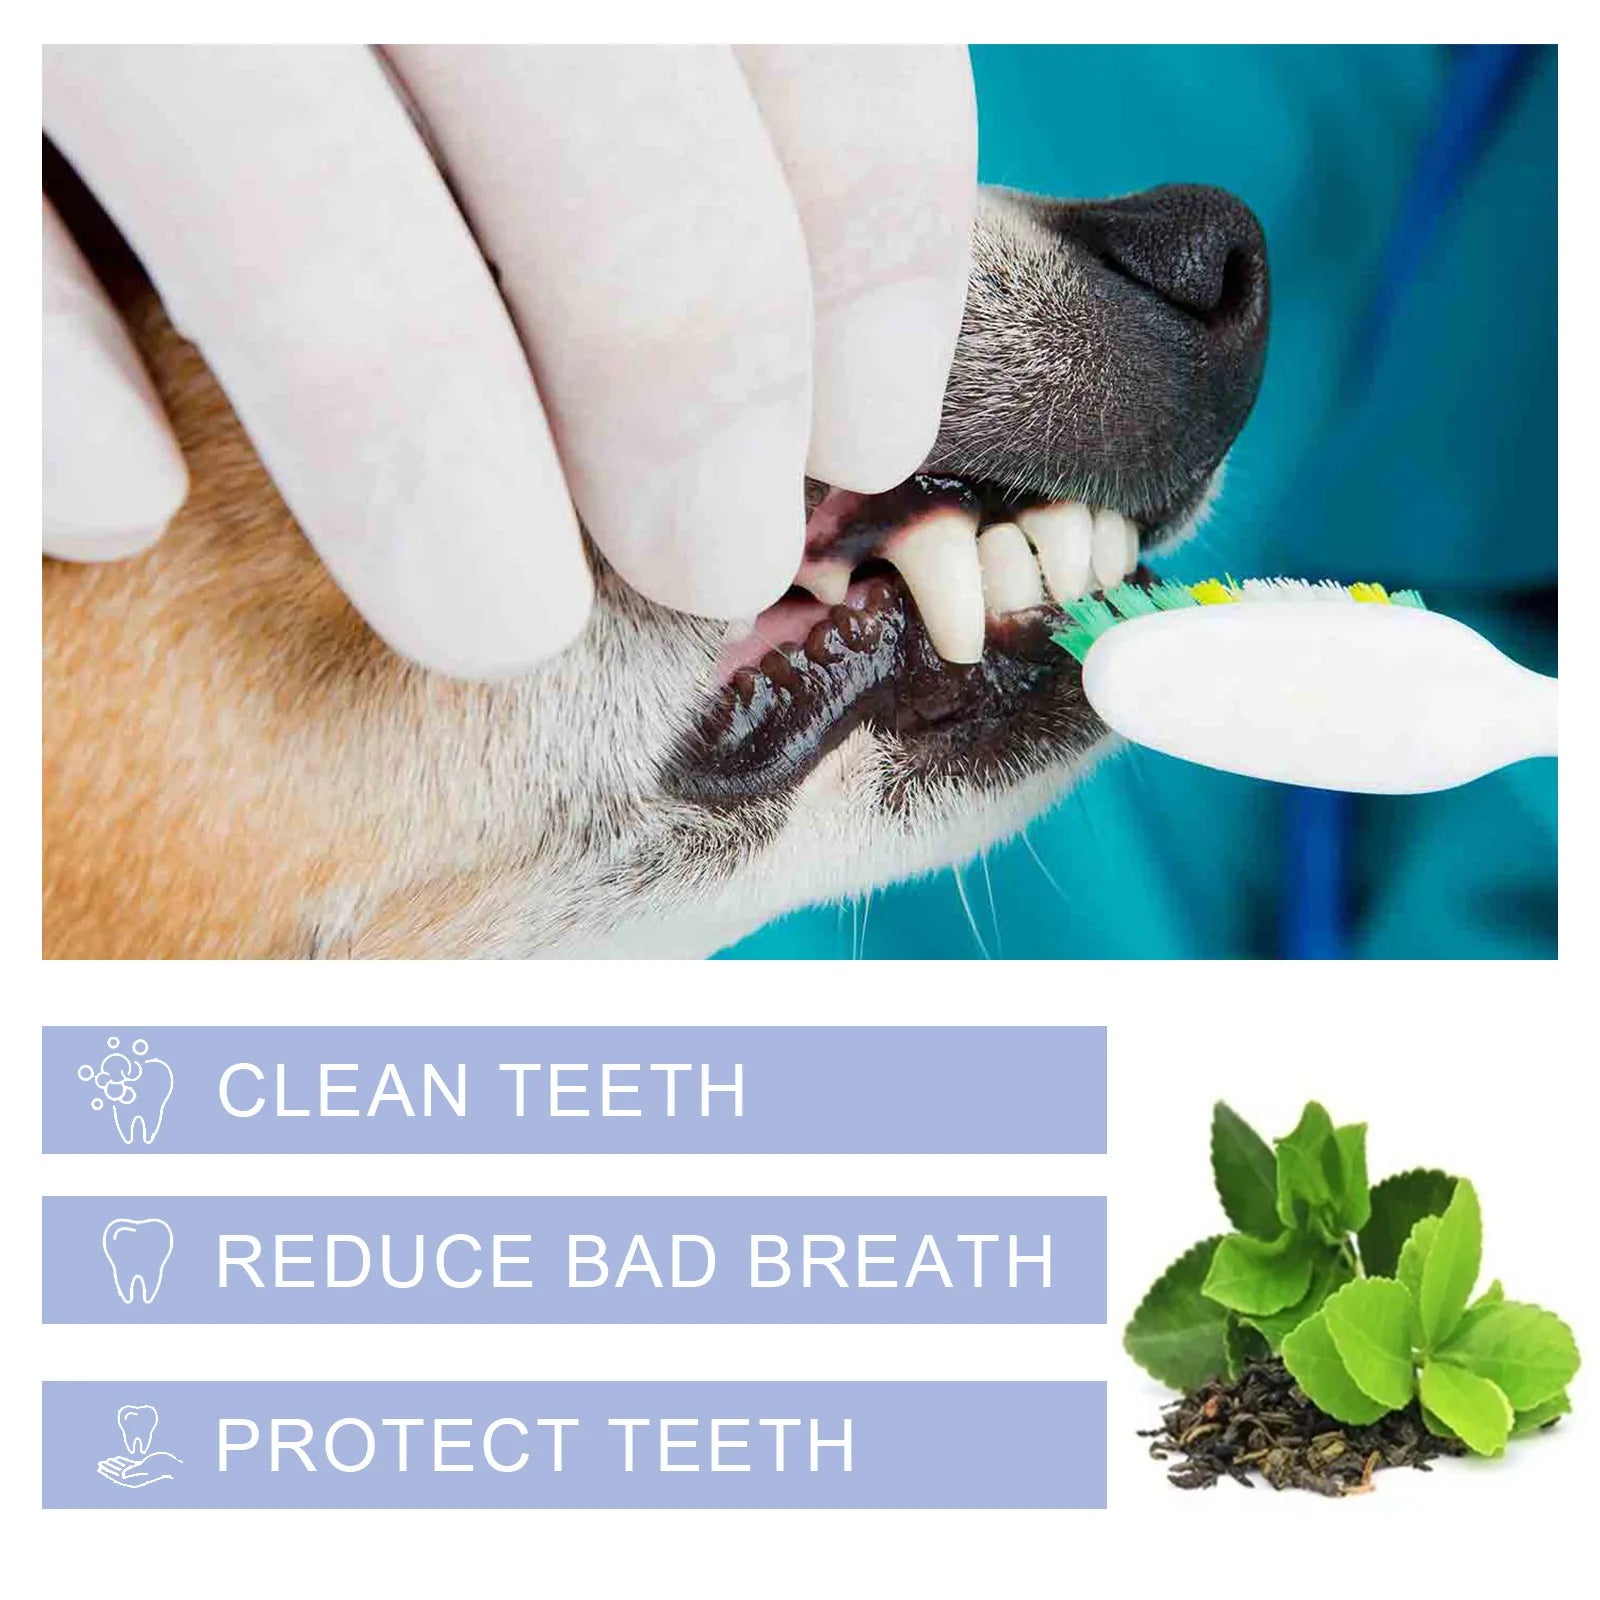 Pet Toothpaste Kitten Dental Plaque Tartar Removal Teeth Whitening Toothpaste Dog Mouth Fresh Deodorant Oral Care Grooming Tools